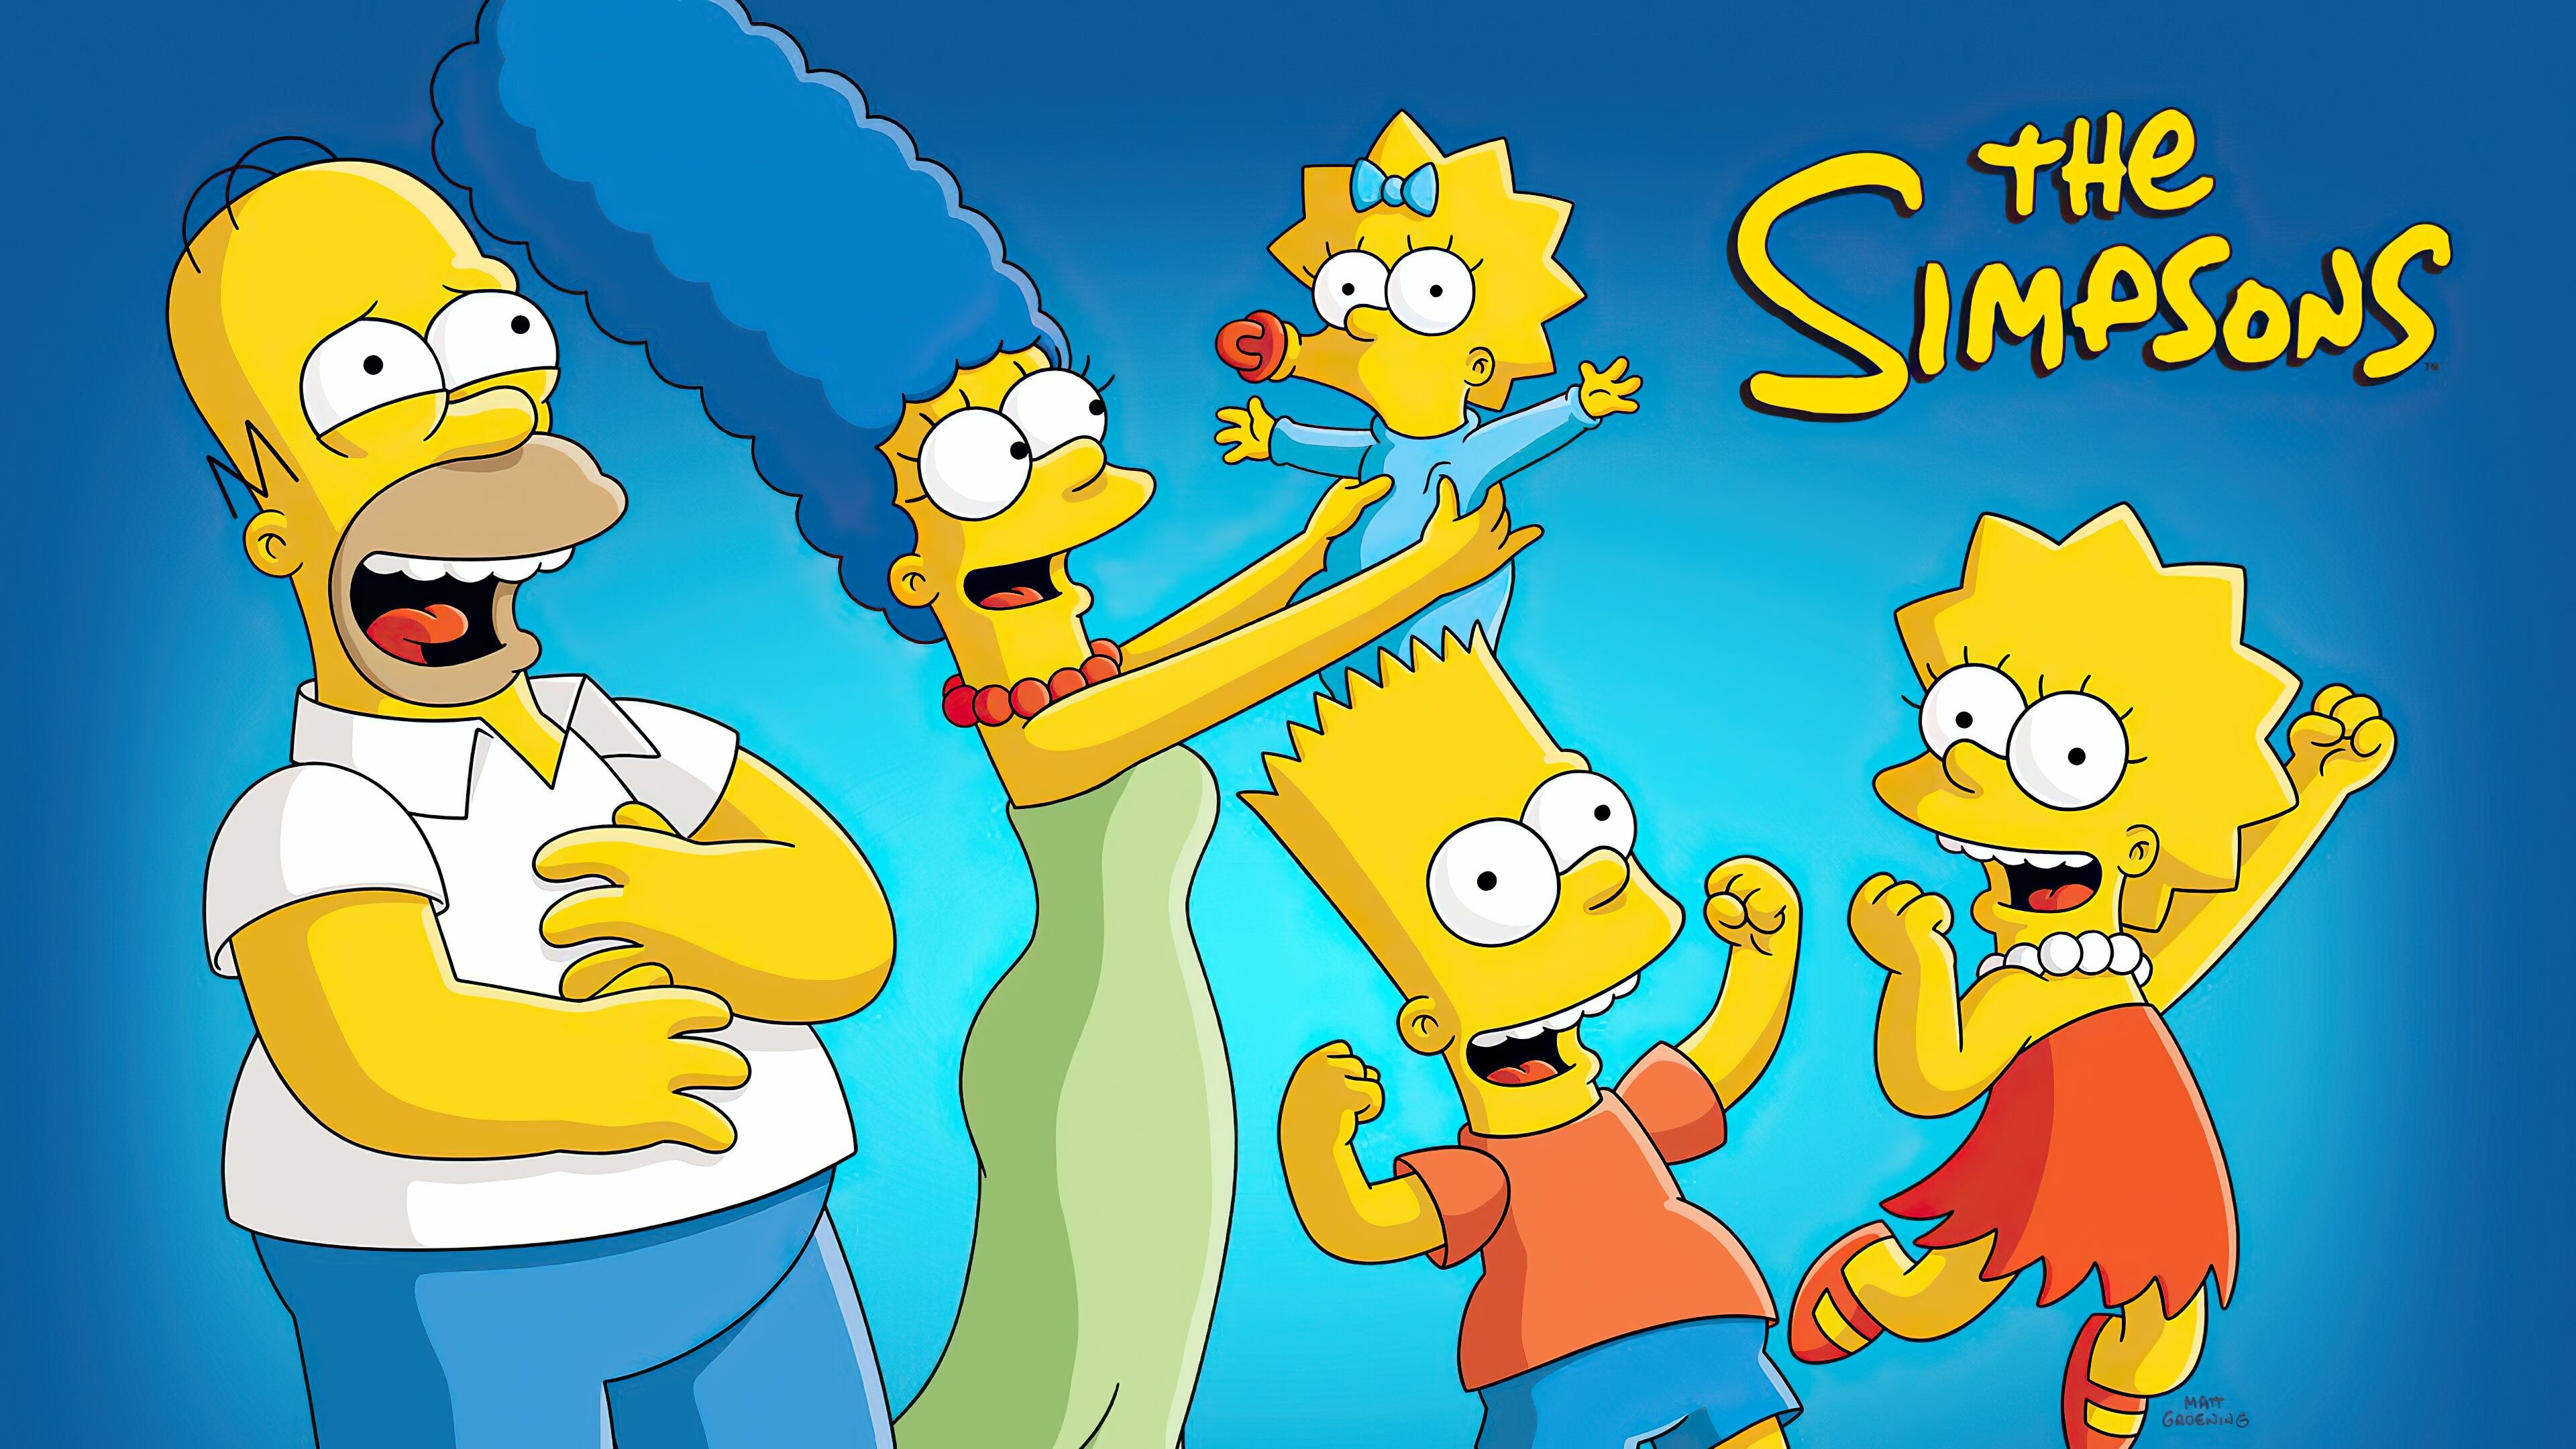 The Simpsons: The series is a satirical depiction of American life, epitomized by the titular family. 3840x2160 4K Wallpaper.